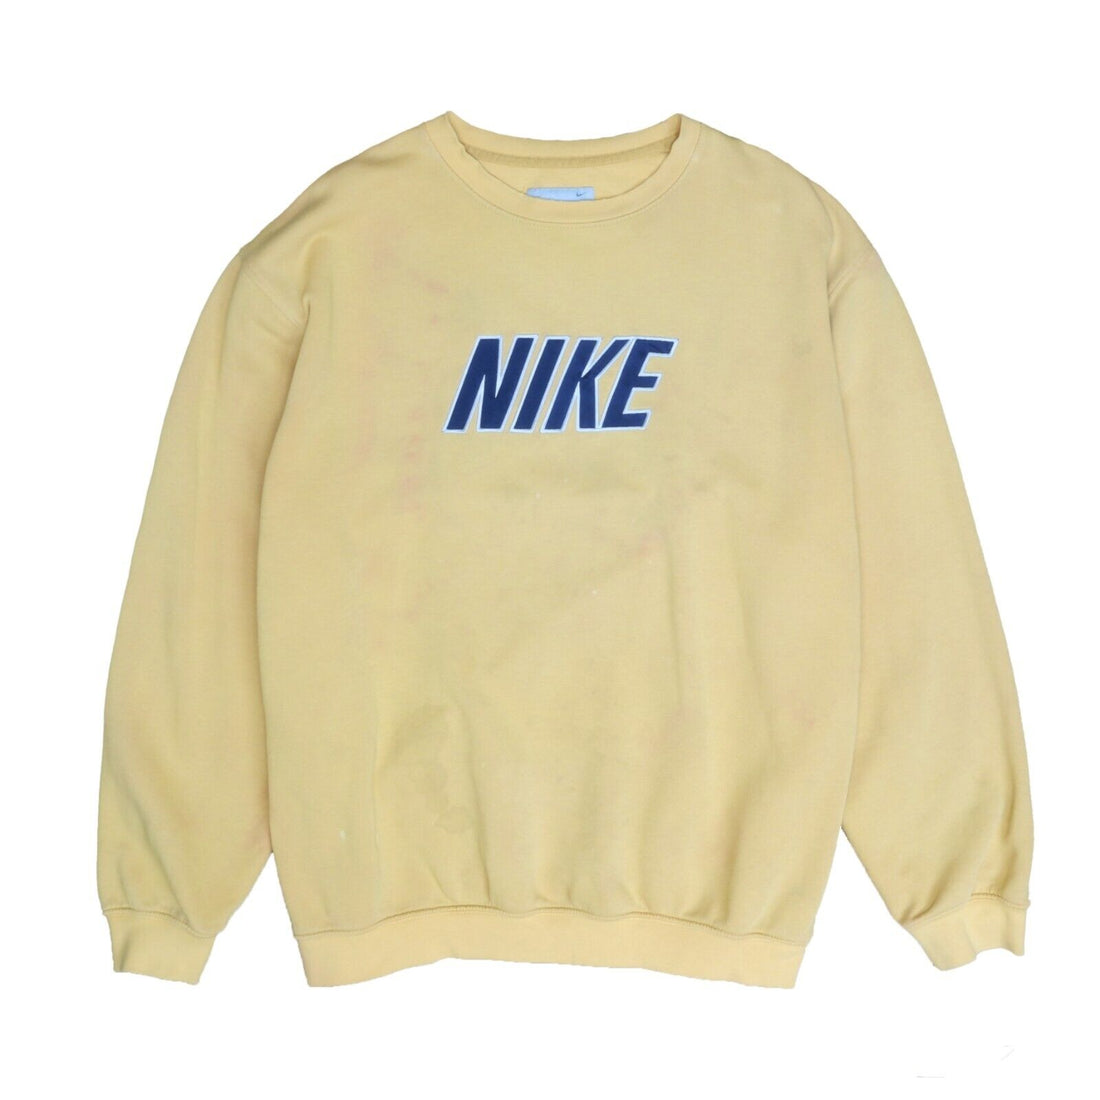 Vintage Nike Sweatshirt Crewneck Size XL Yellow Spell Out